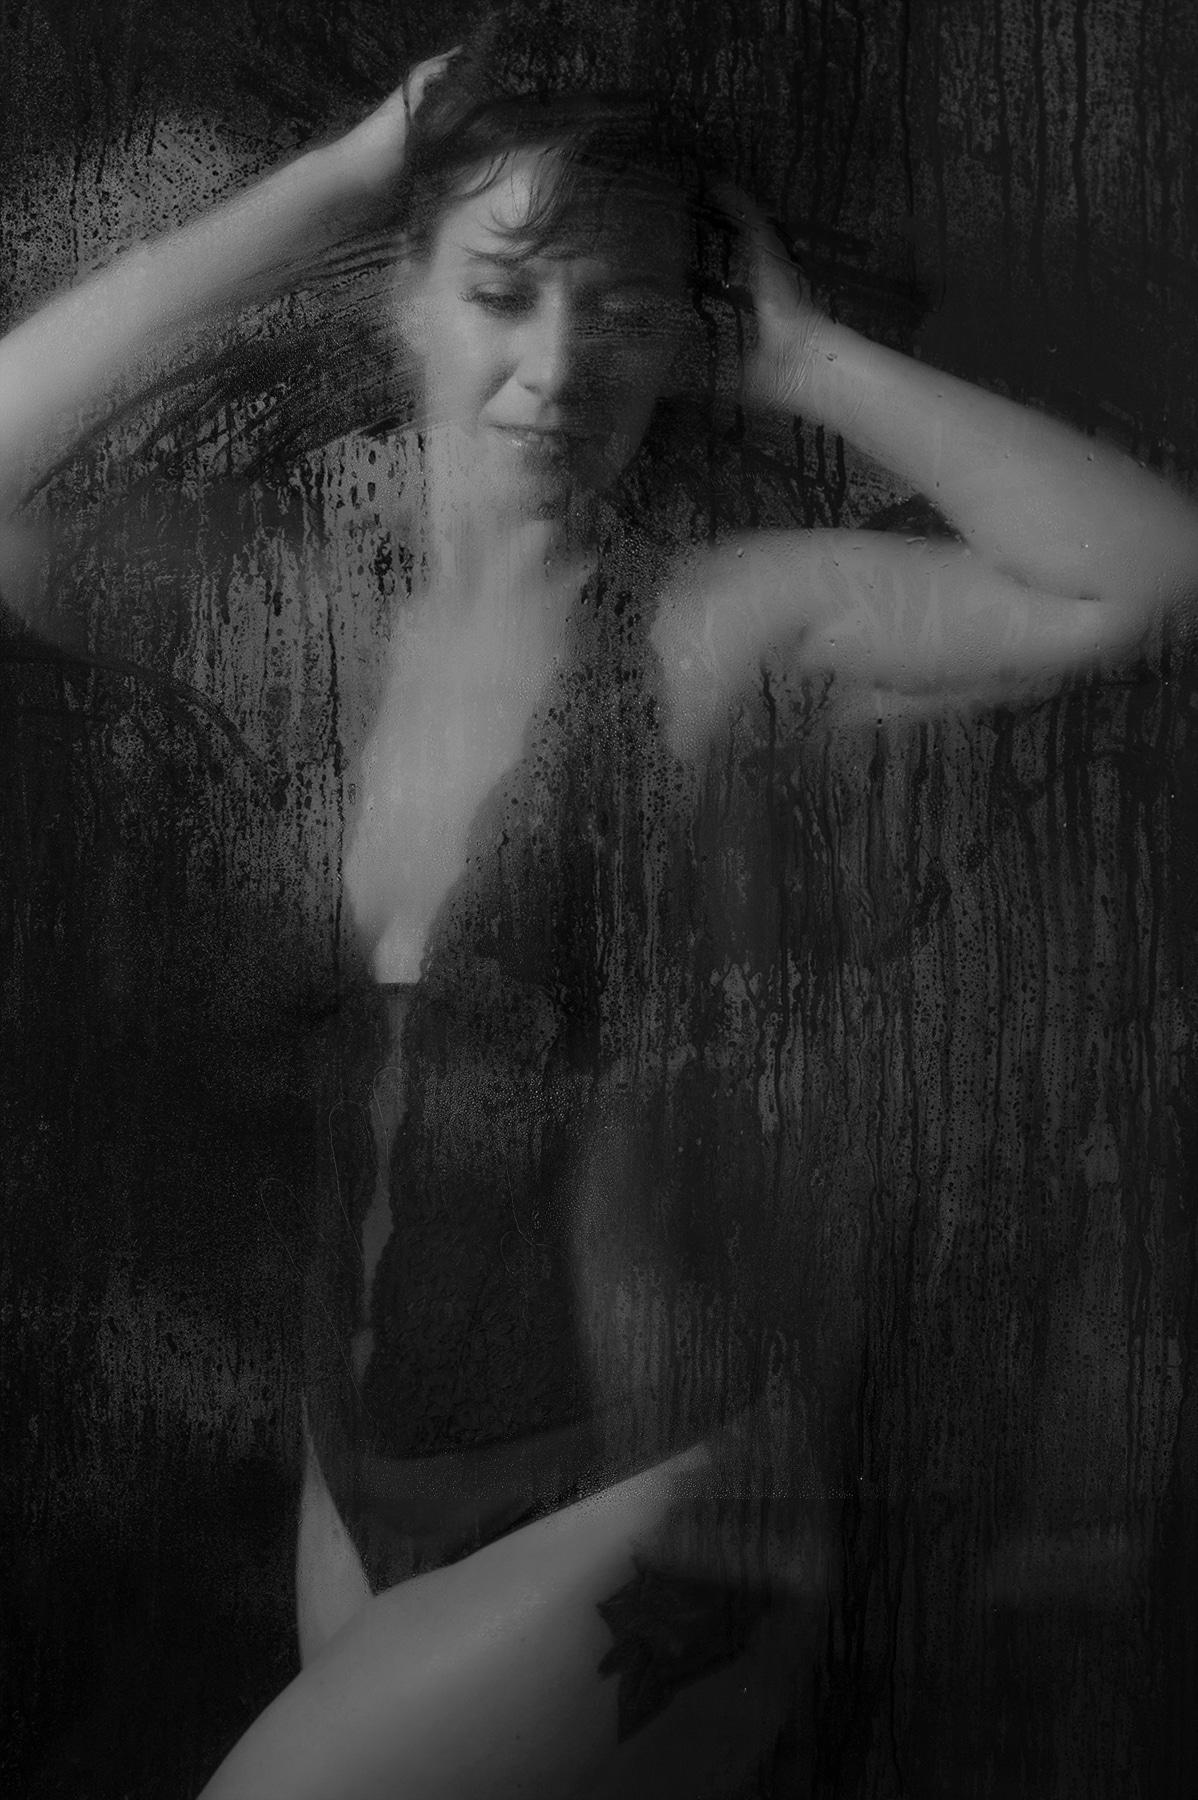 Shannon Hemauer, located in Dillsburg, PA, shoots boudoir shower scenes for clients.